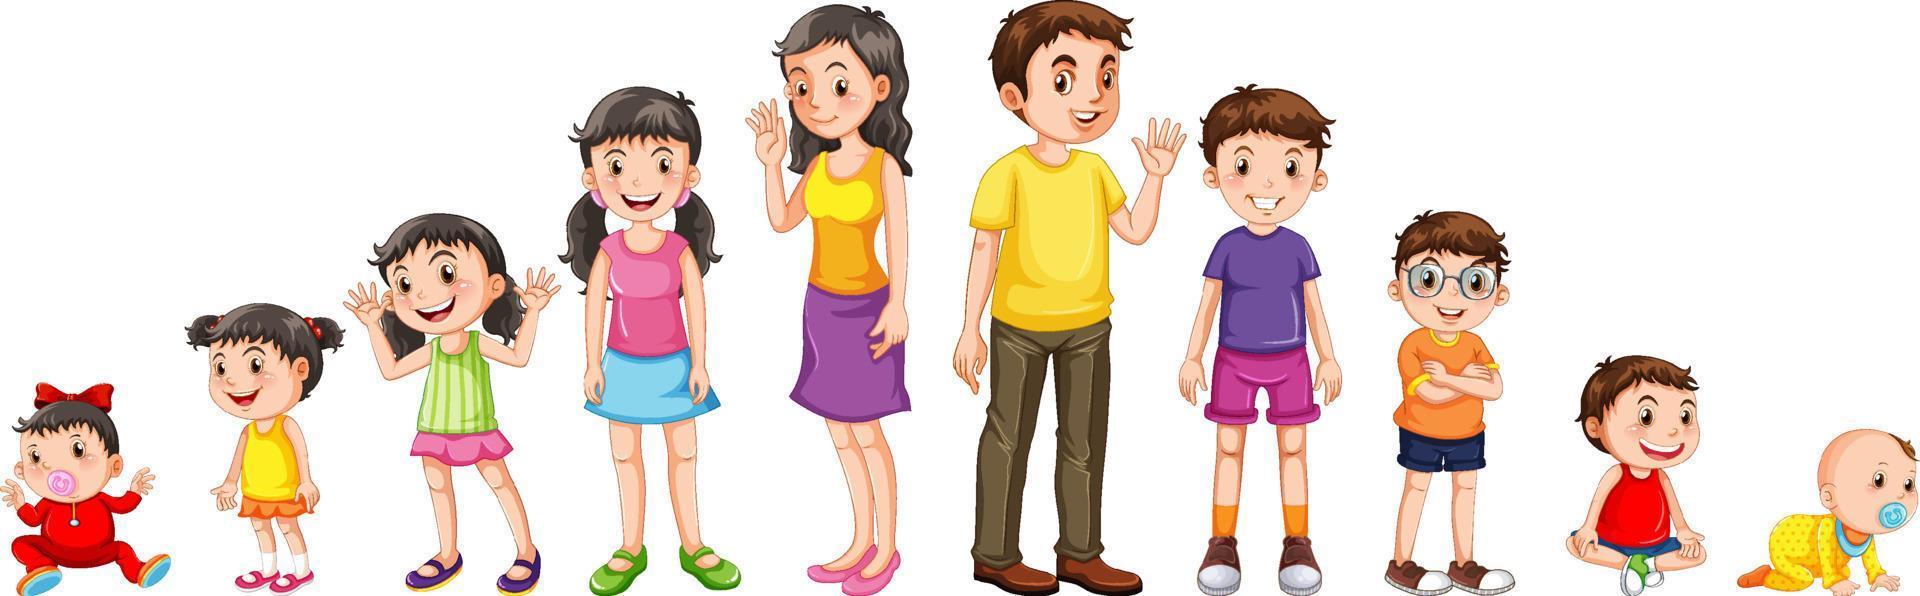 Children in different stages vector